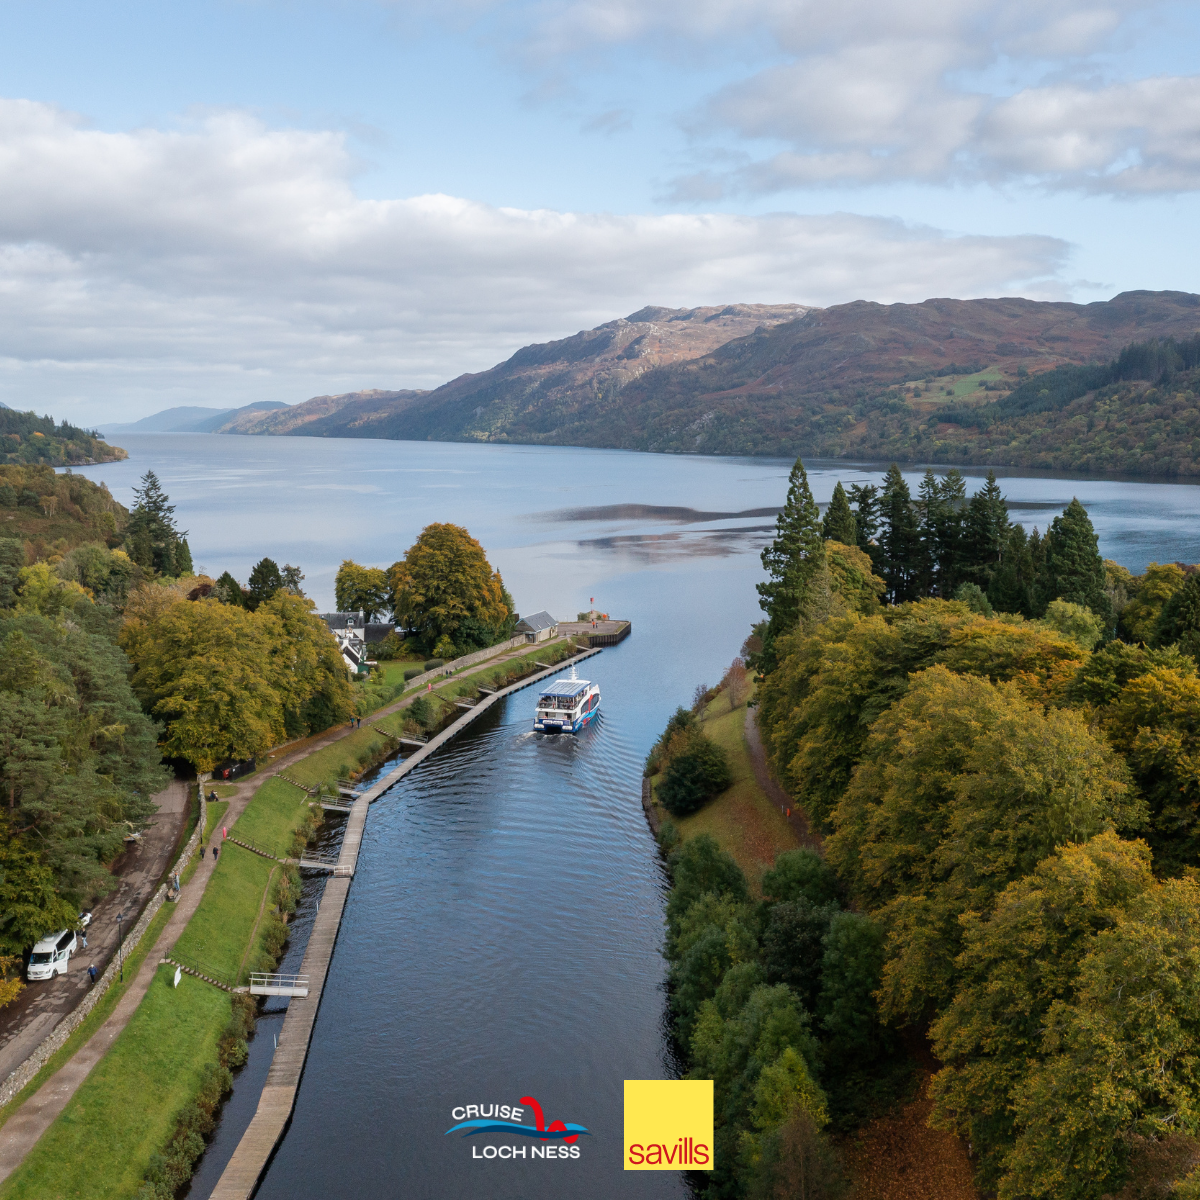 Cruise Loch Ness comes to market for first time ever